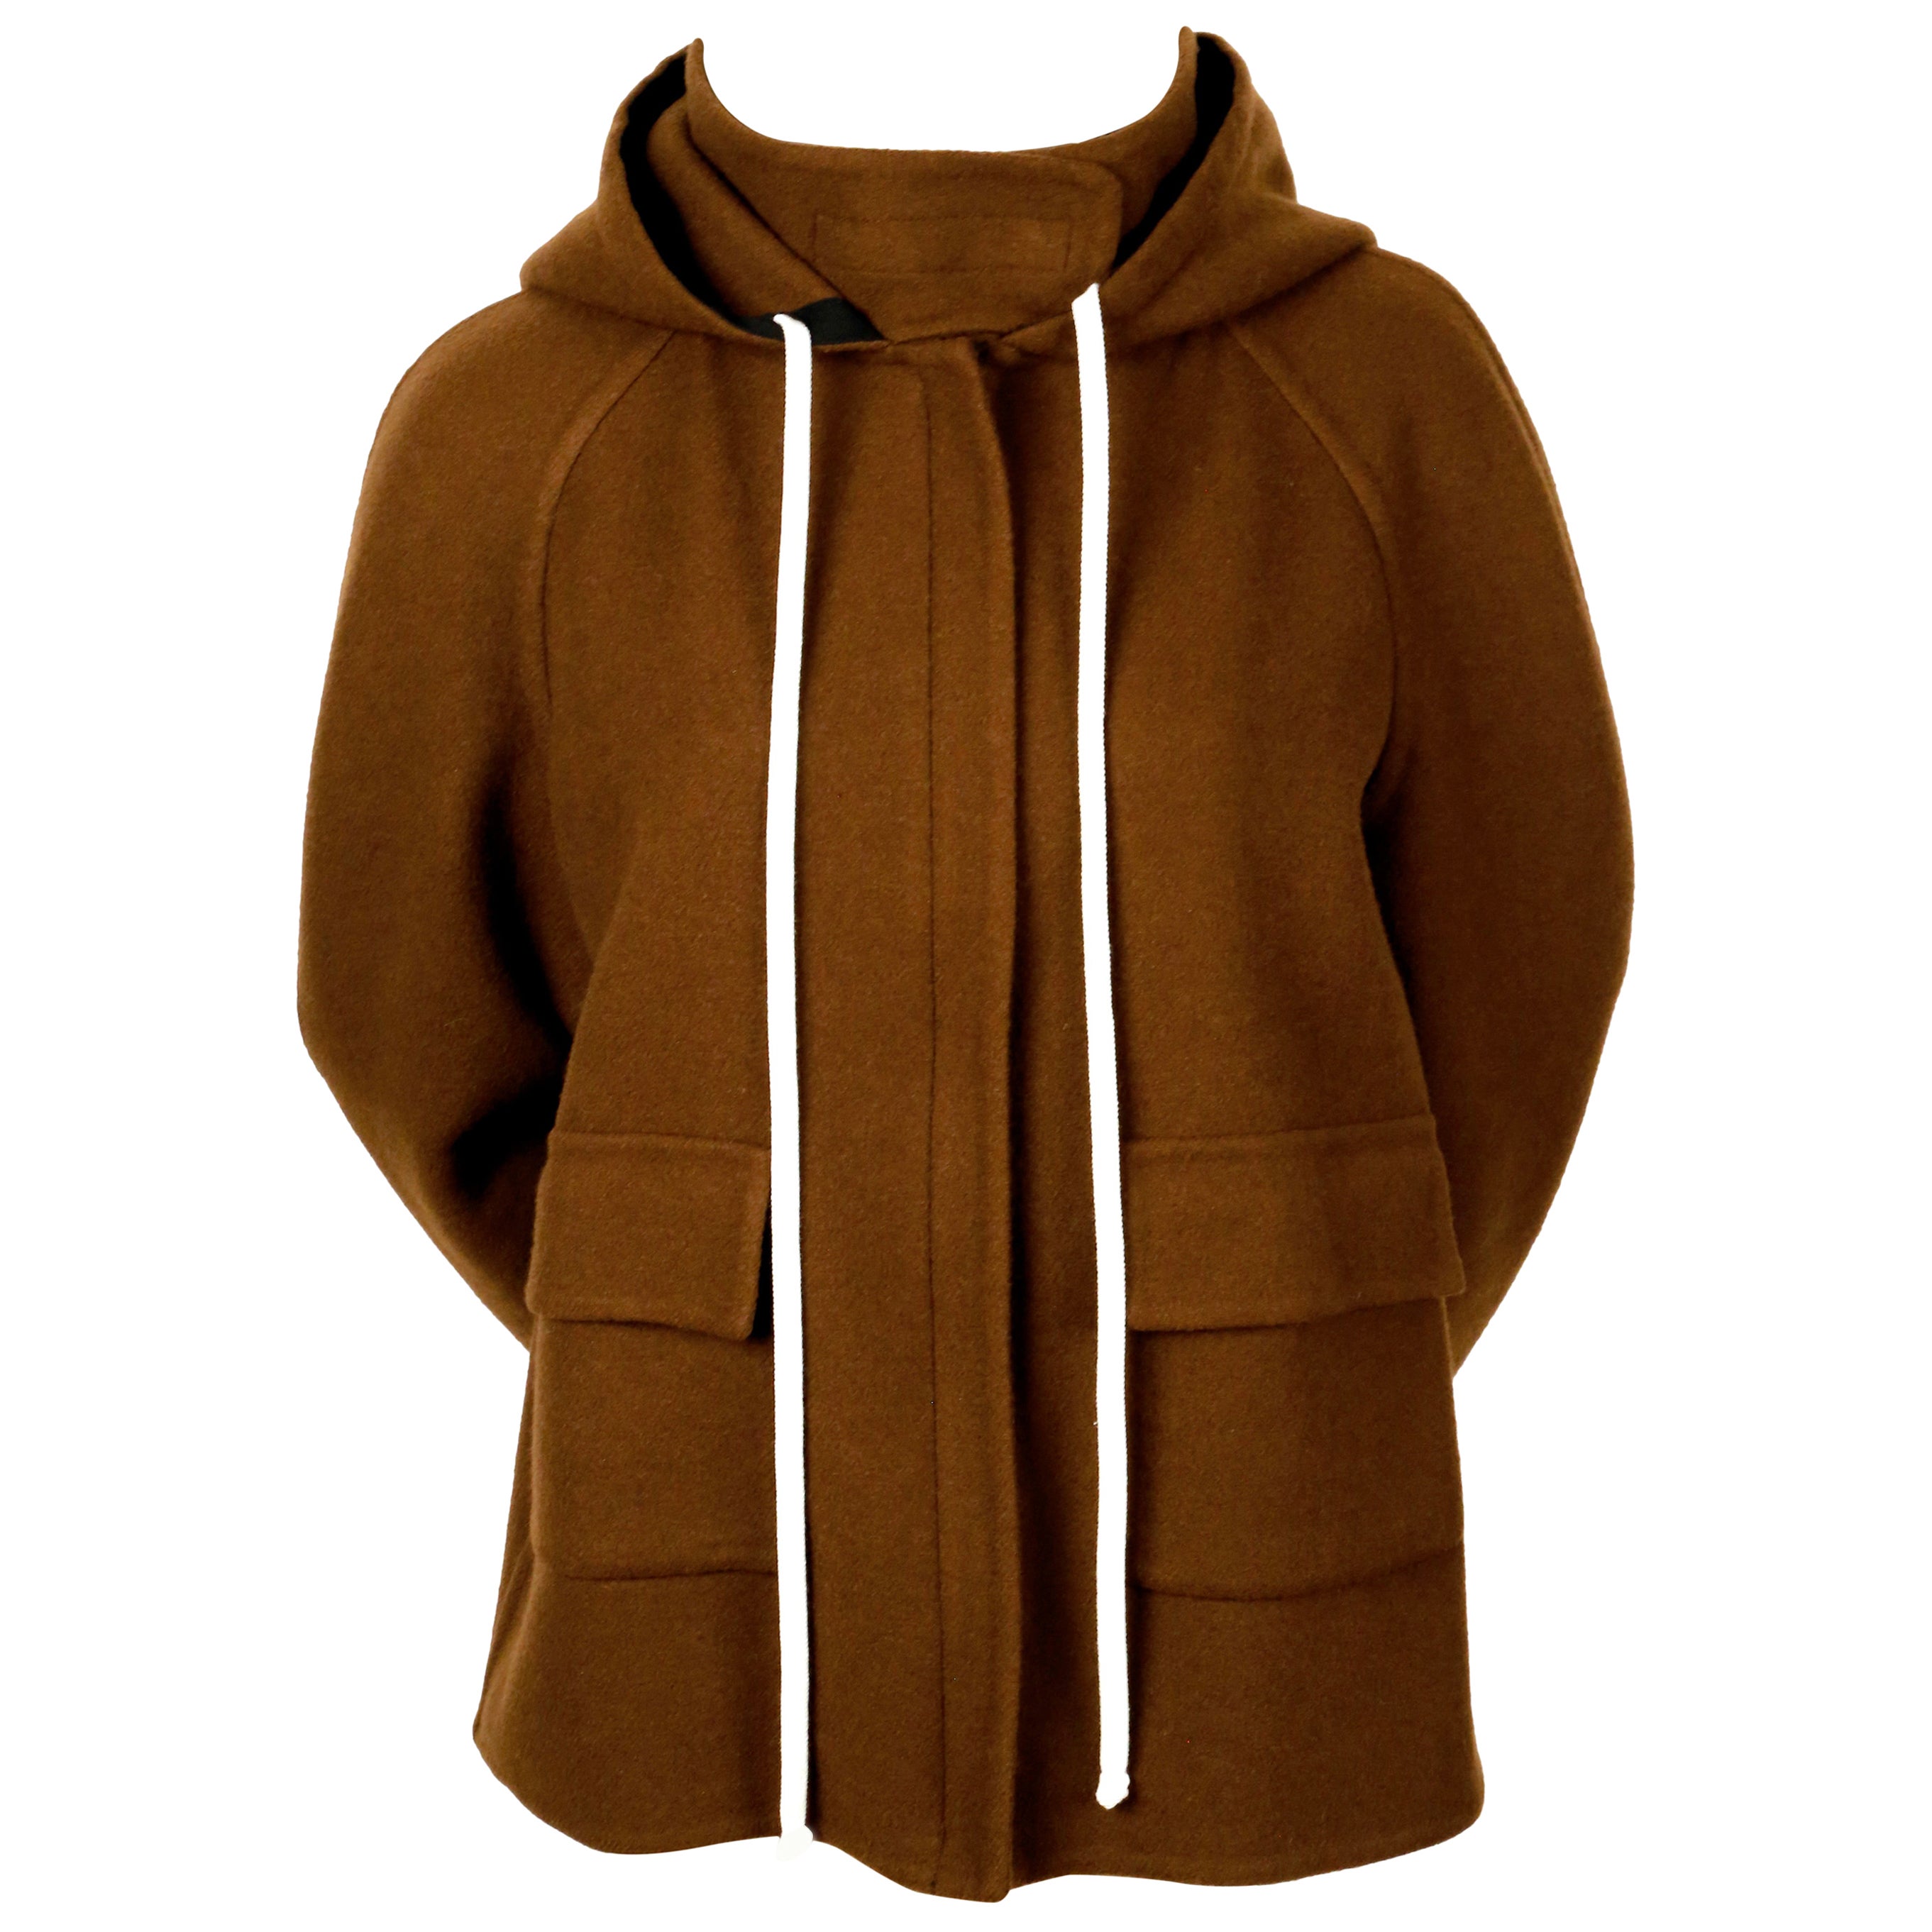 2014 CELINE by PHOEBE PHILO hooded cashmere jacket with patch pockets